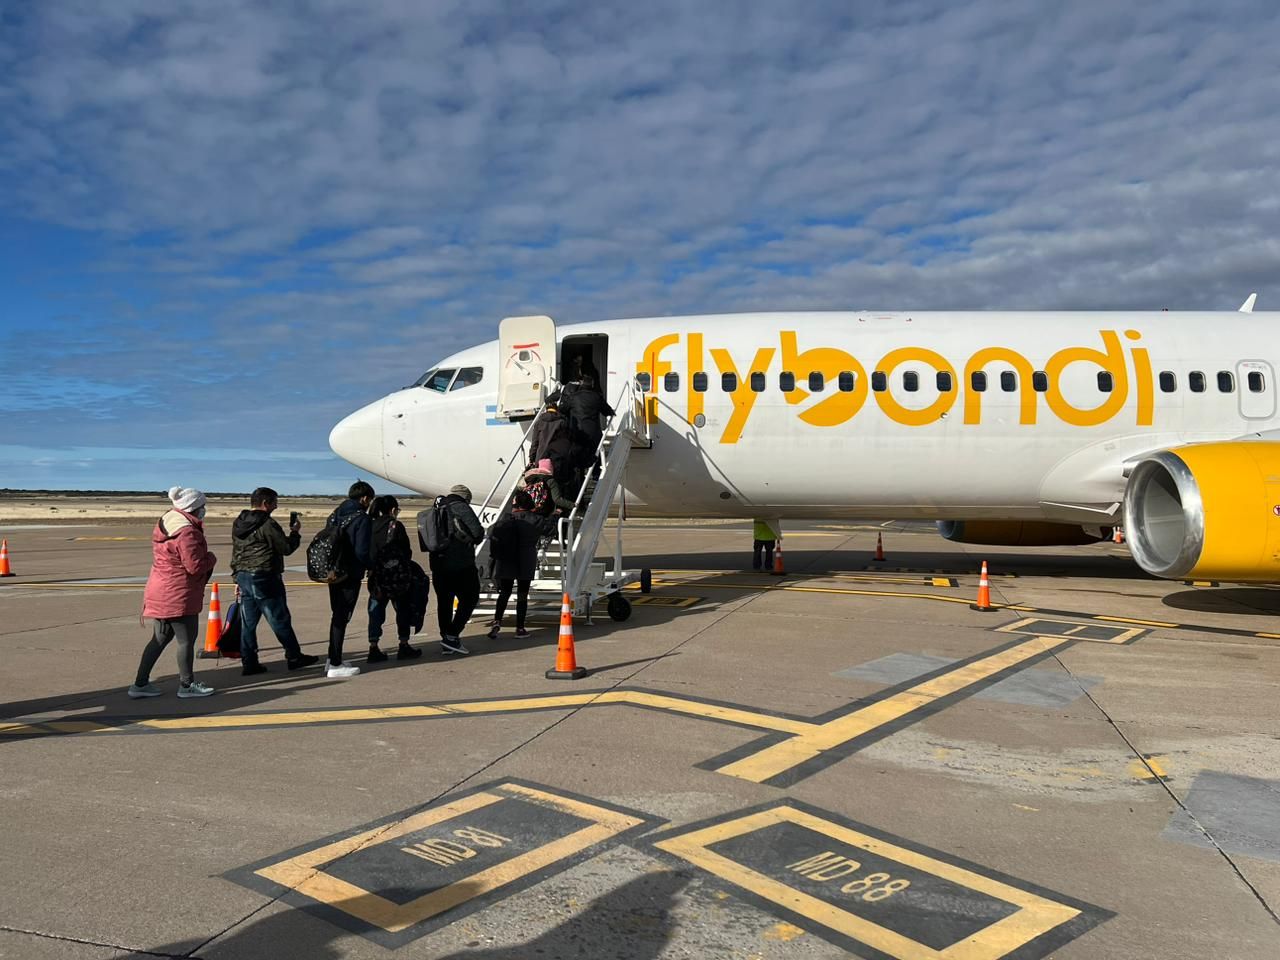 People entering a Flybondi aircraft. Flybondi is an Argentinian ultra-low-cost carrier